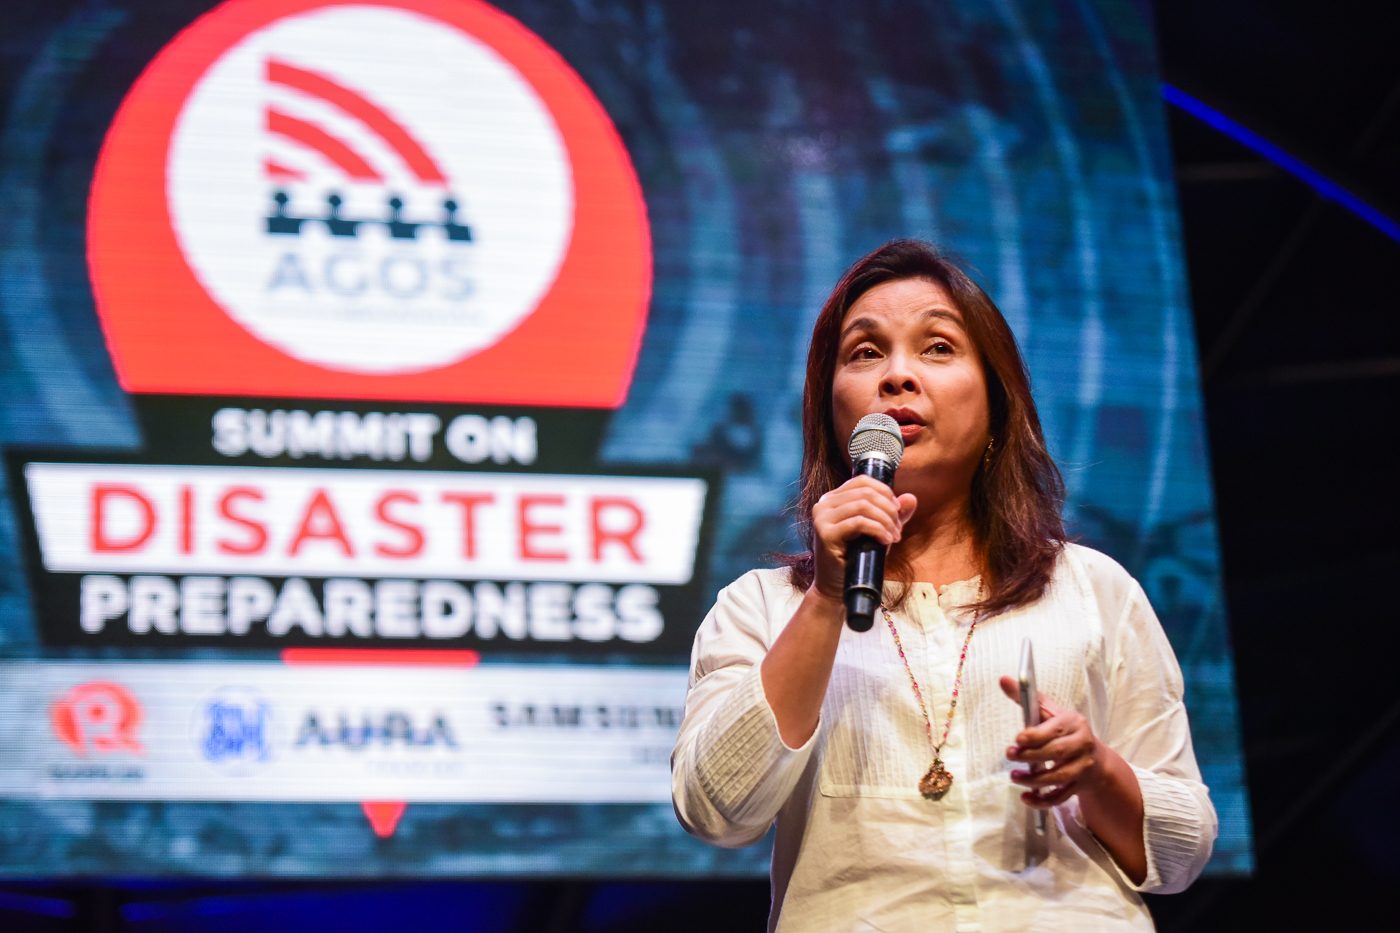 Legarda shares 9 ways to reduce disaster risks, impact on lives